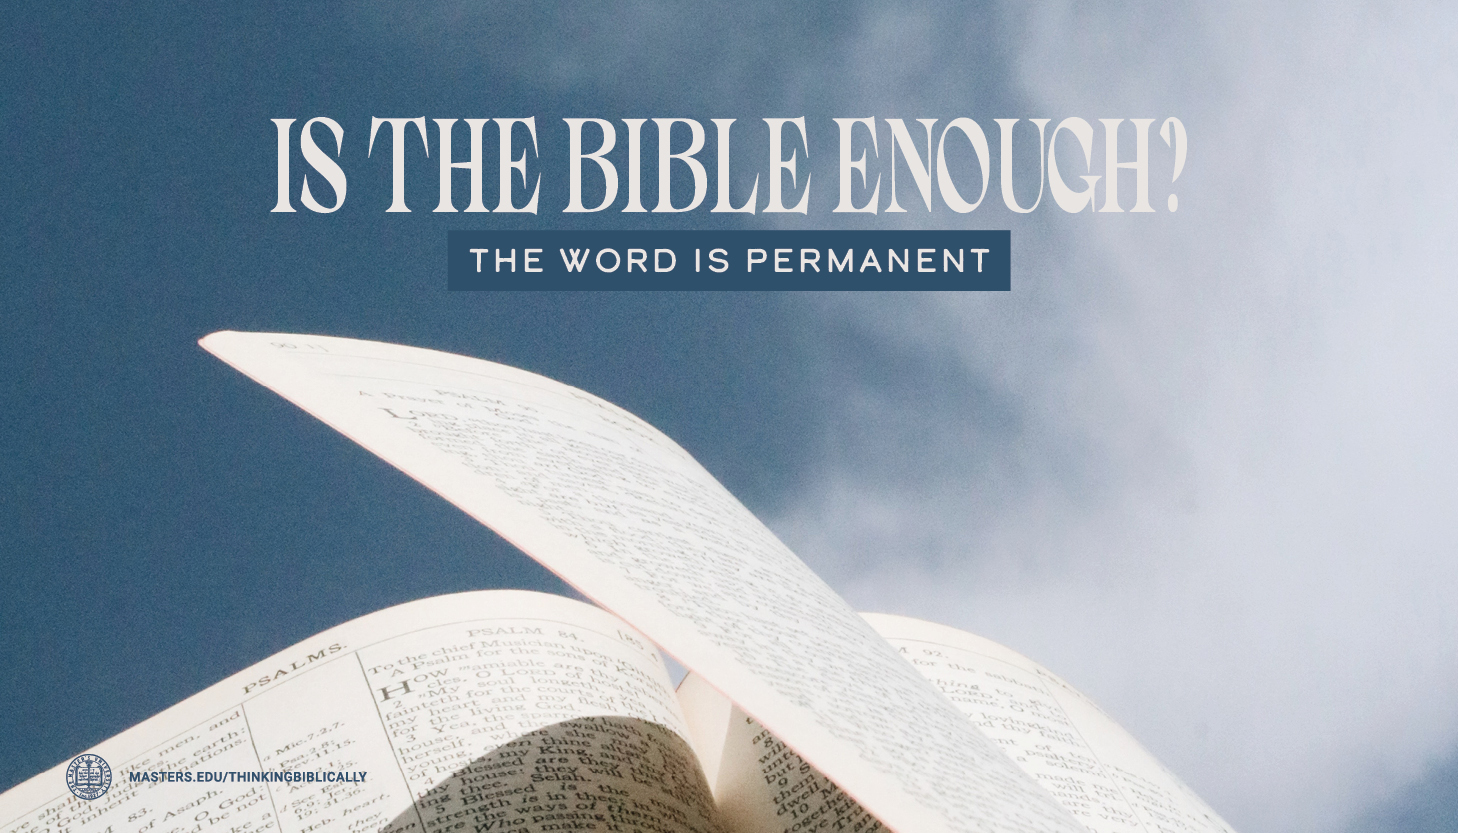 The Word is Permanent